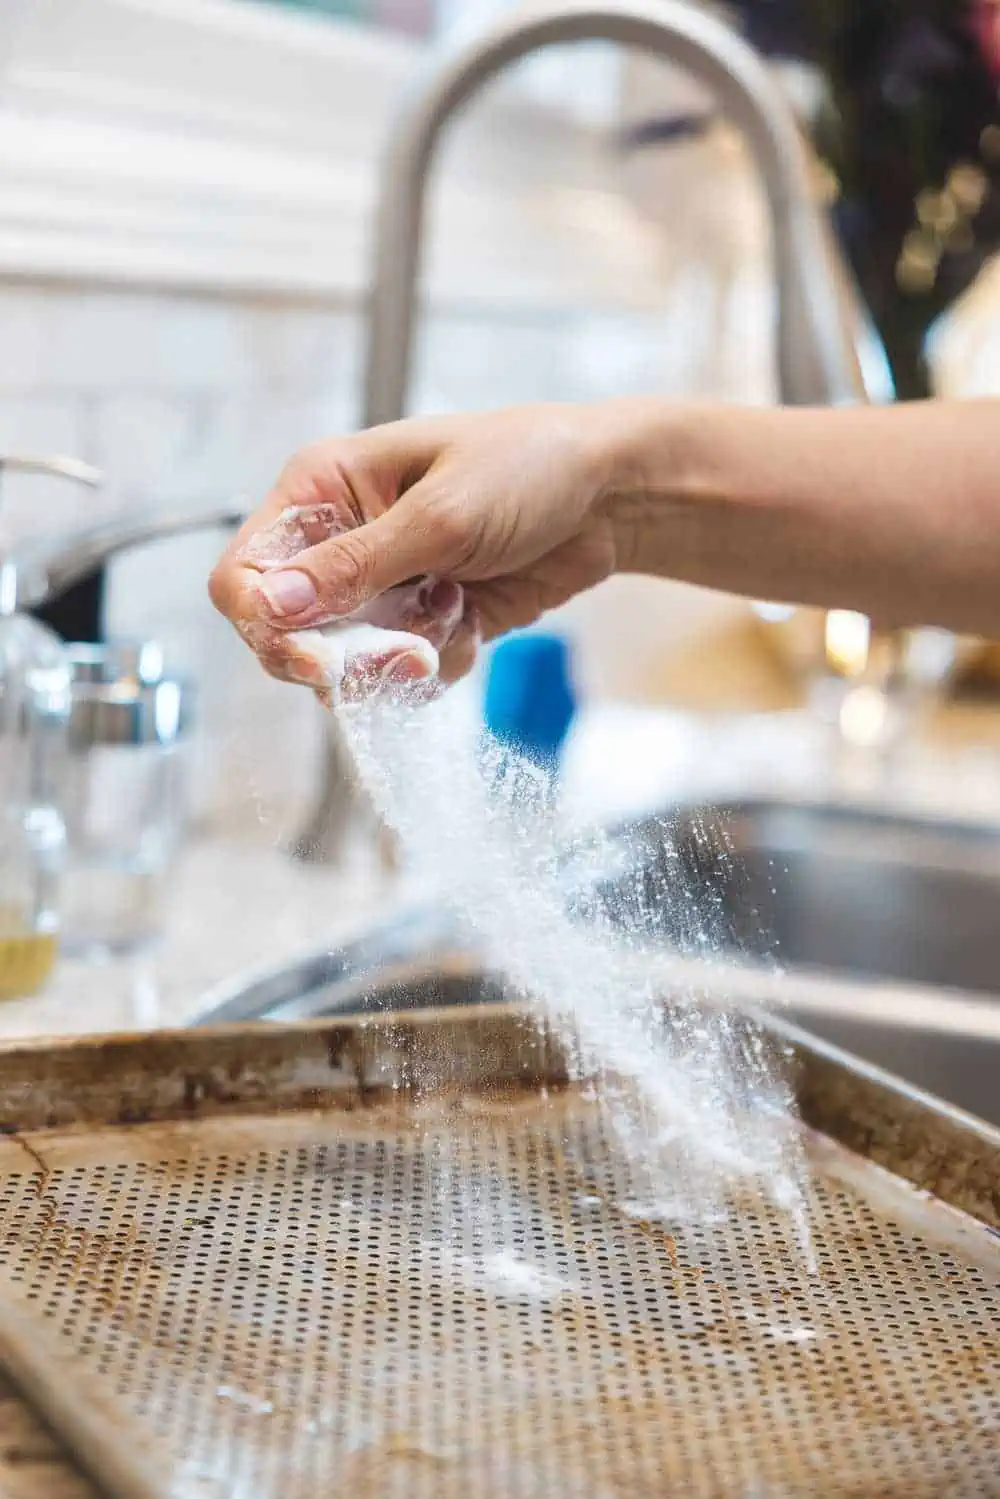 7 Ingenious Uses for Sugar Soap around the Home